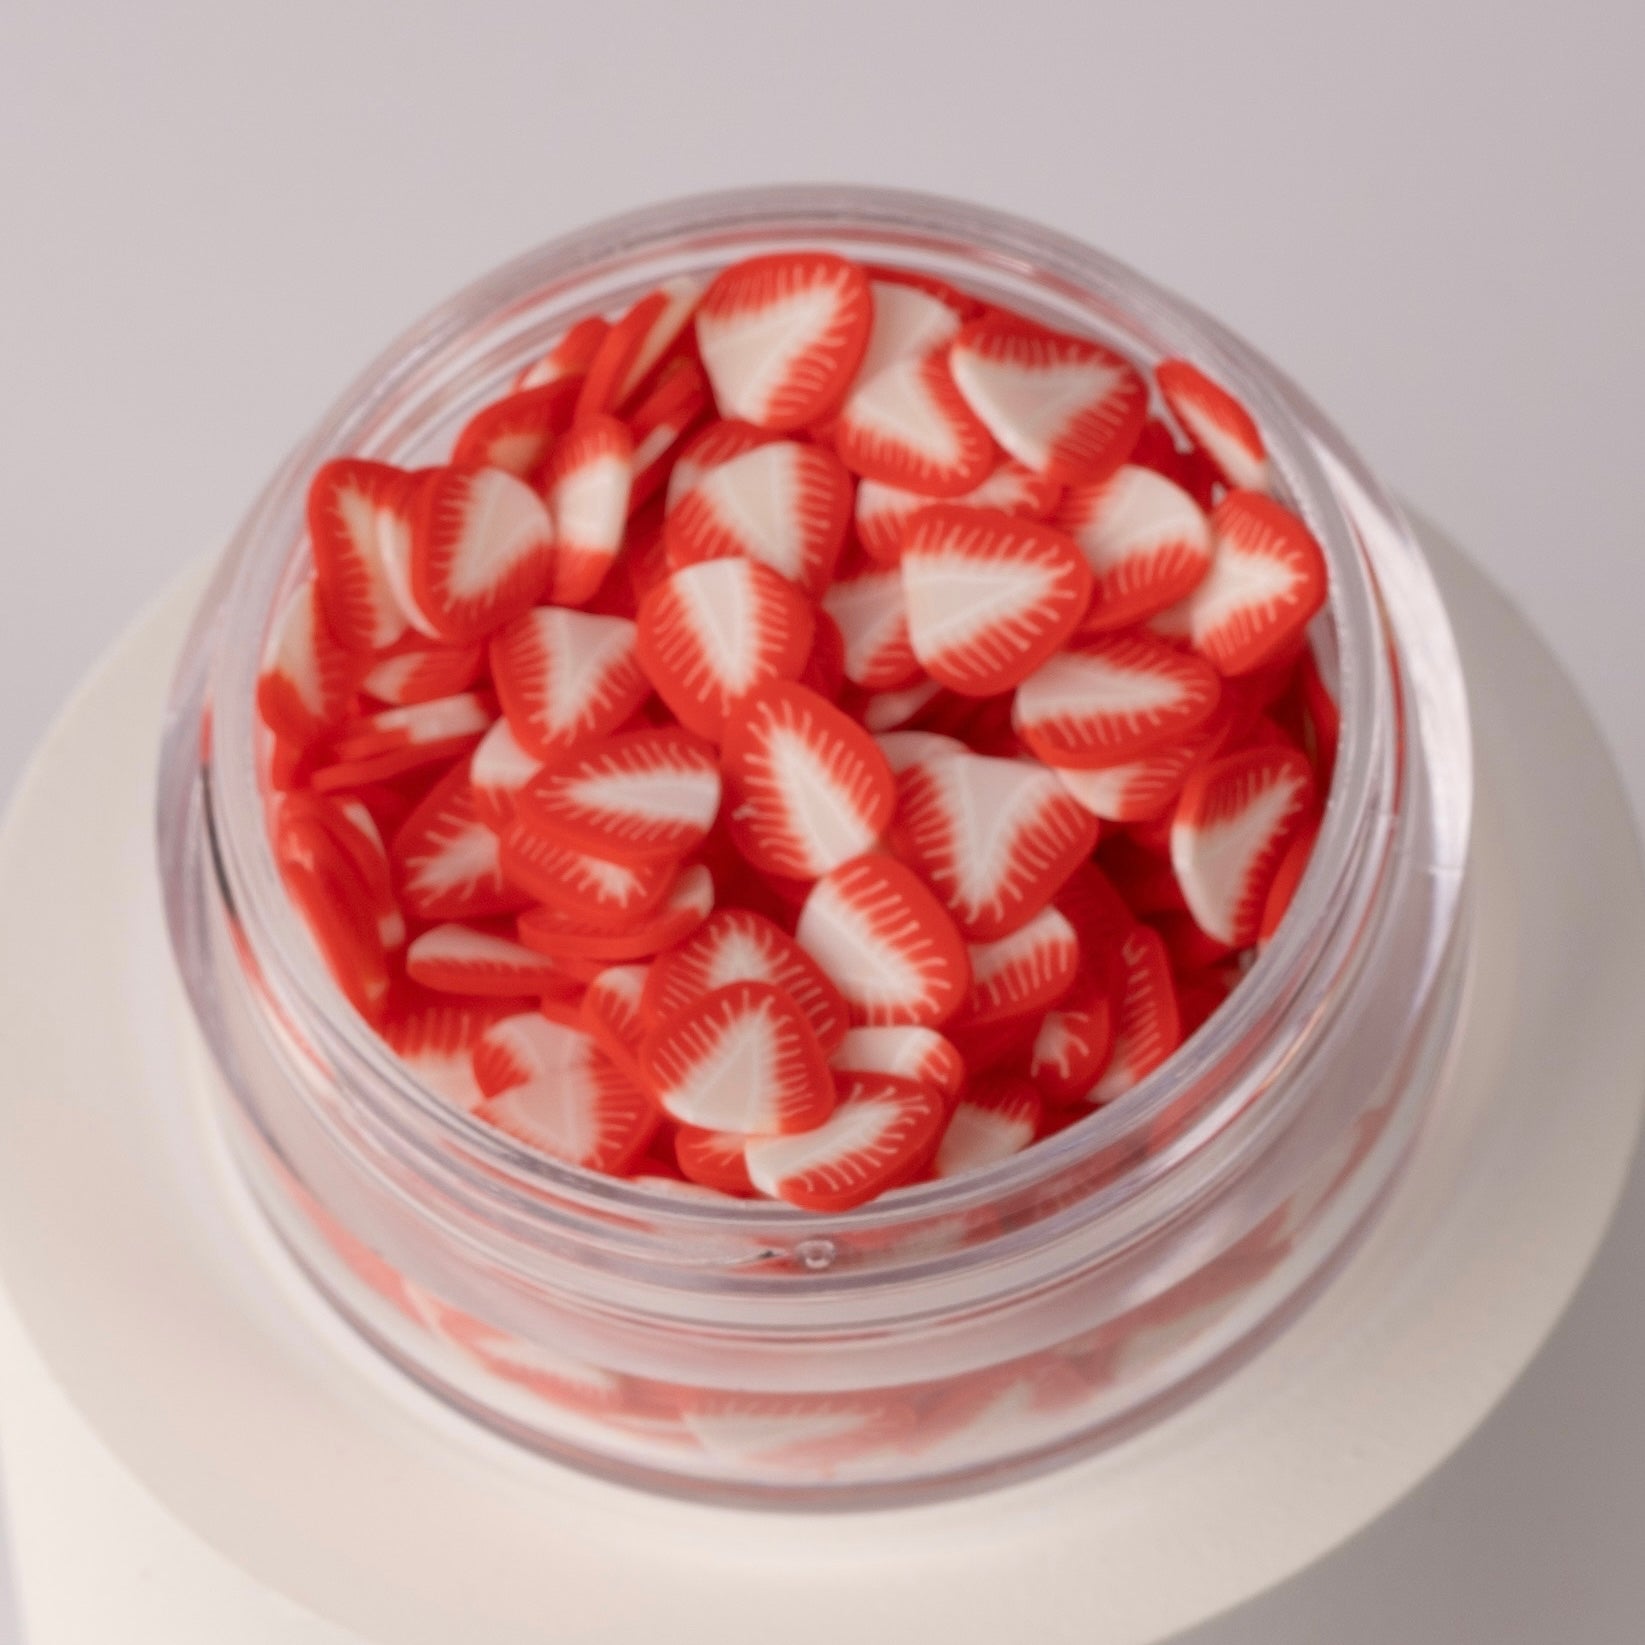 Mini strawberry slices in clear jar on white background.